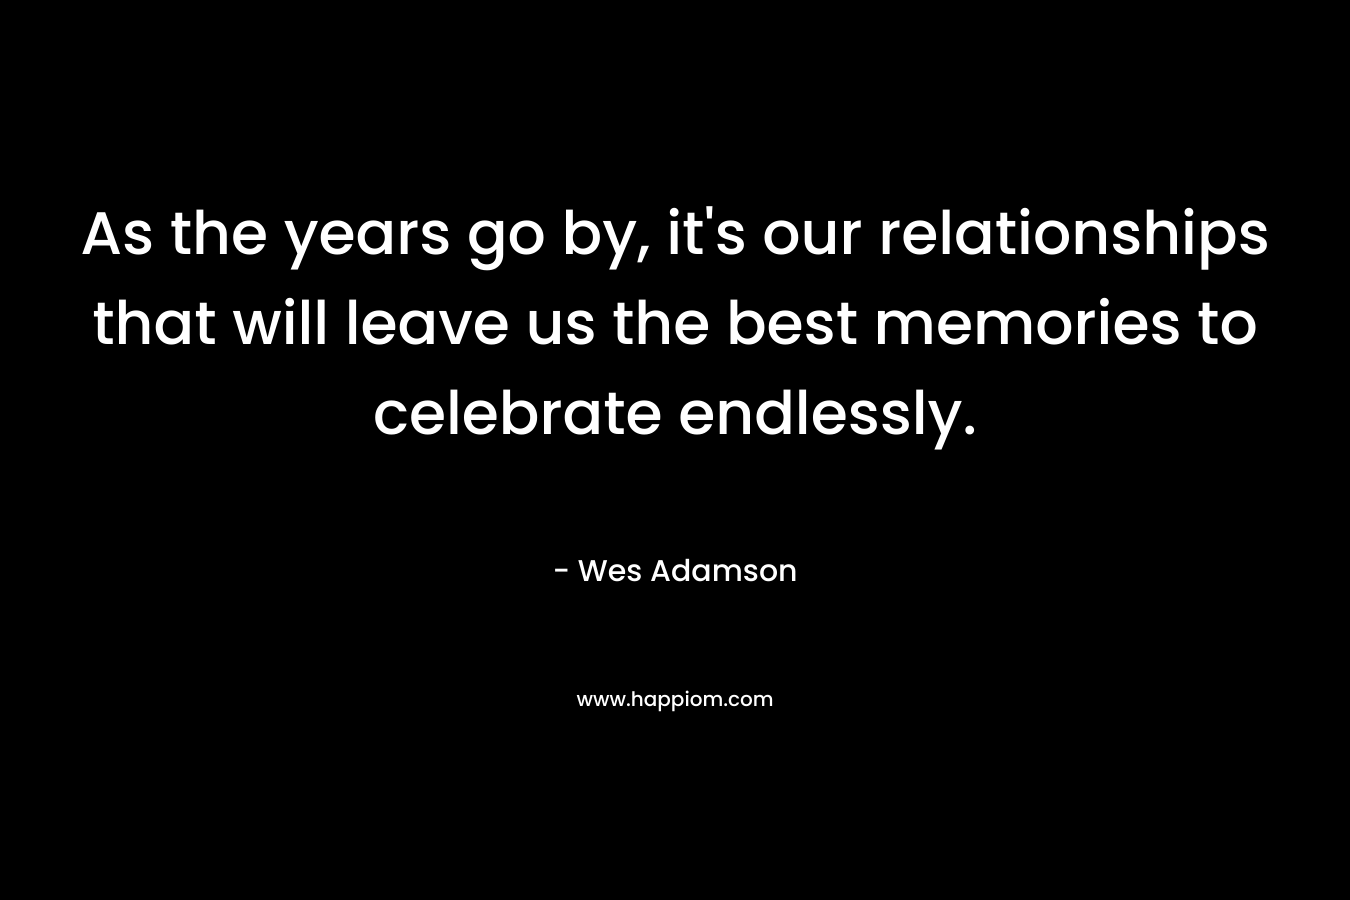 As the years go by, it's our relationships that will leave us the best memories to celebrate endlessly.